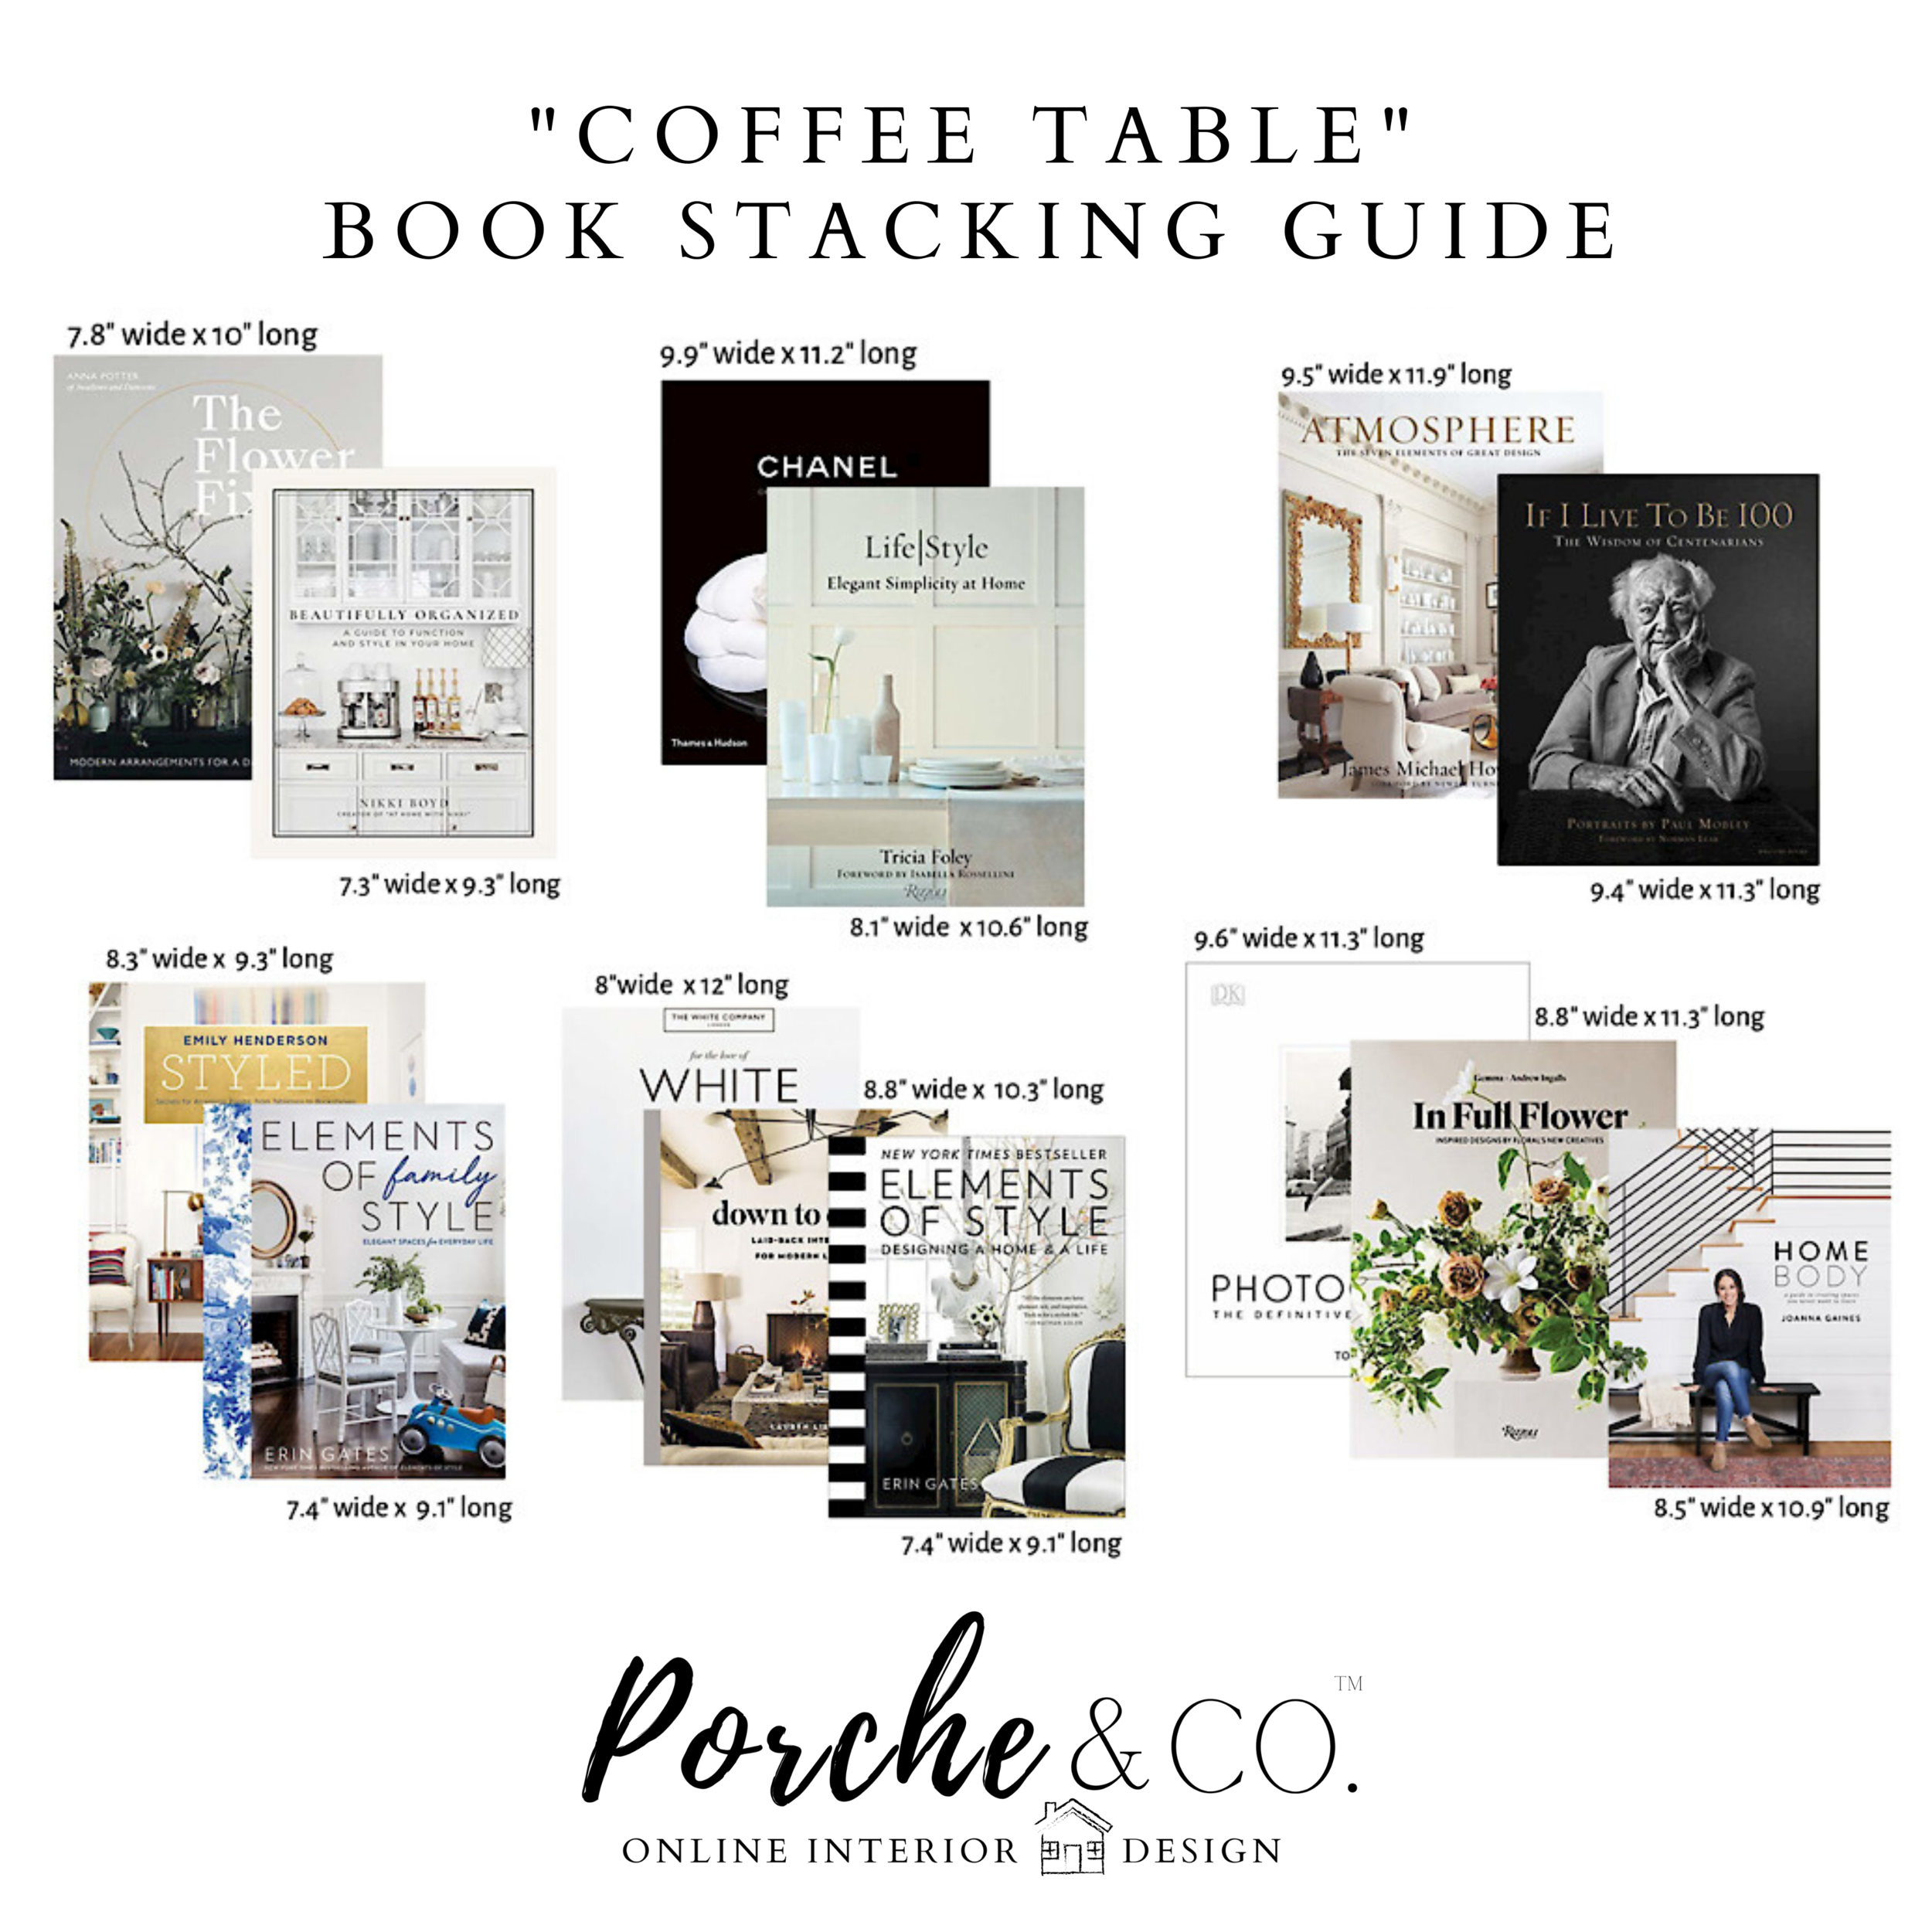 Top 10 Travel Coffee Table Books. The Ultimate Holiday Gifts For Travel… |  by Molly Headley | Farewell Alarms